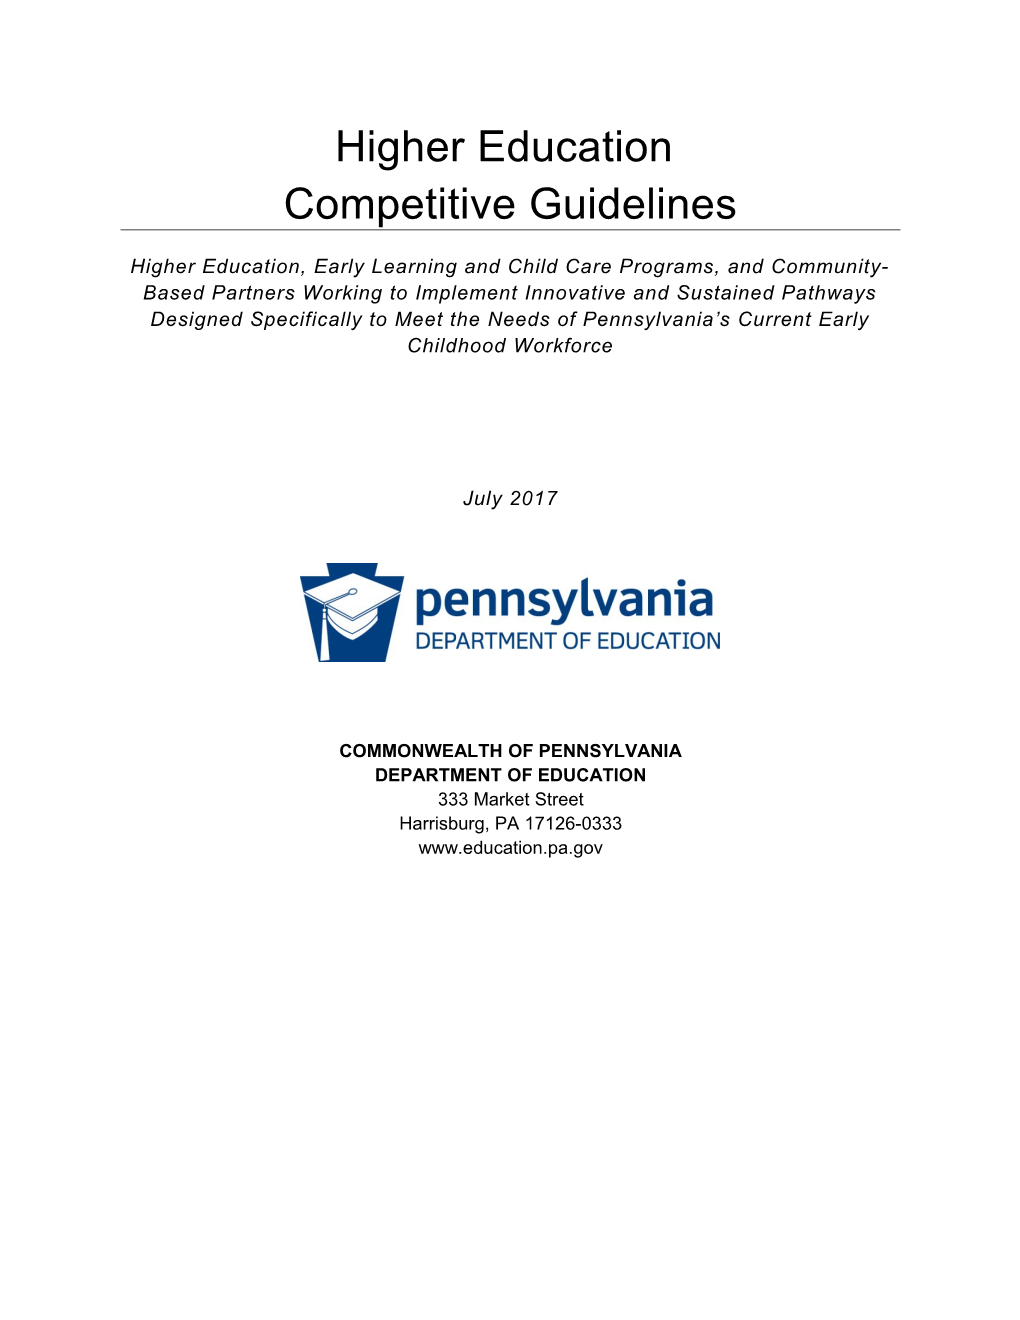 Higher Education Competitive Guidelines